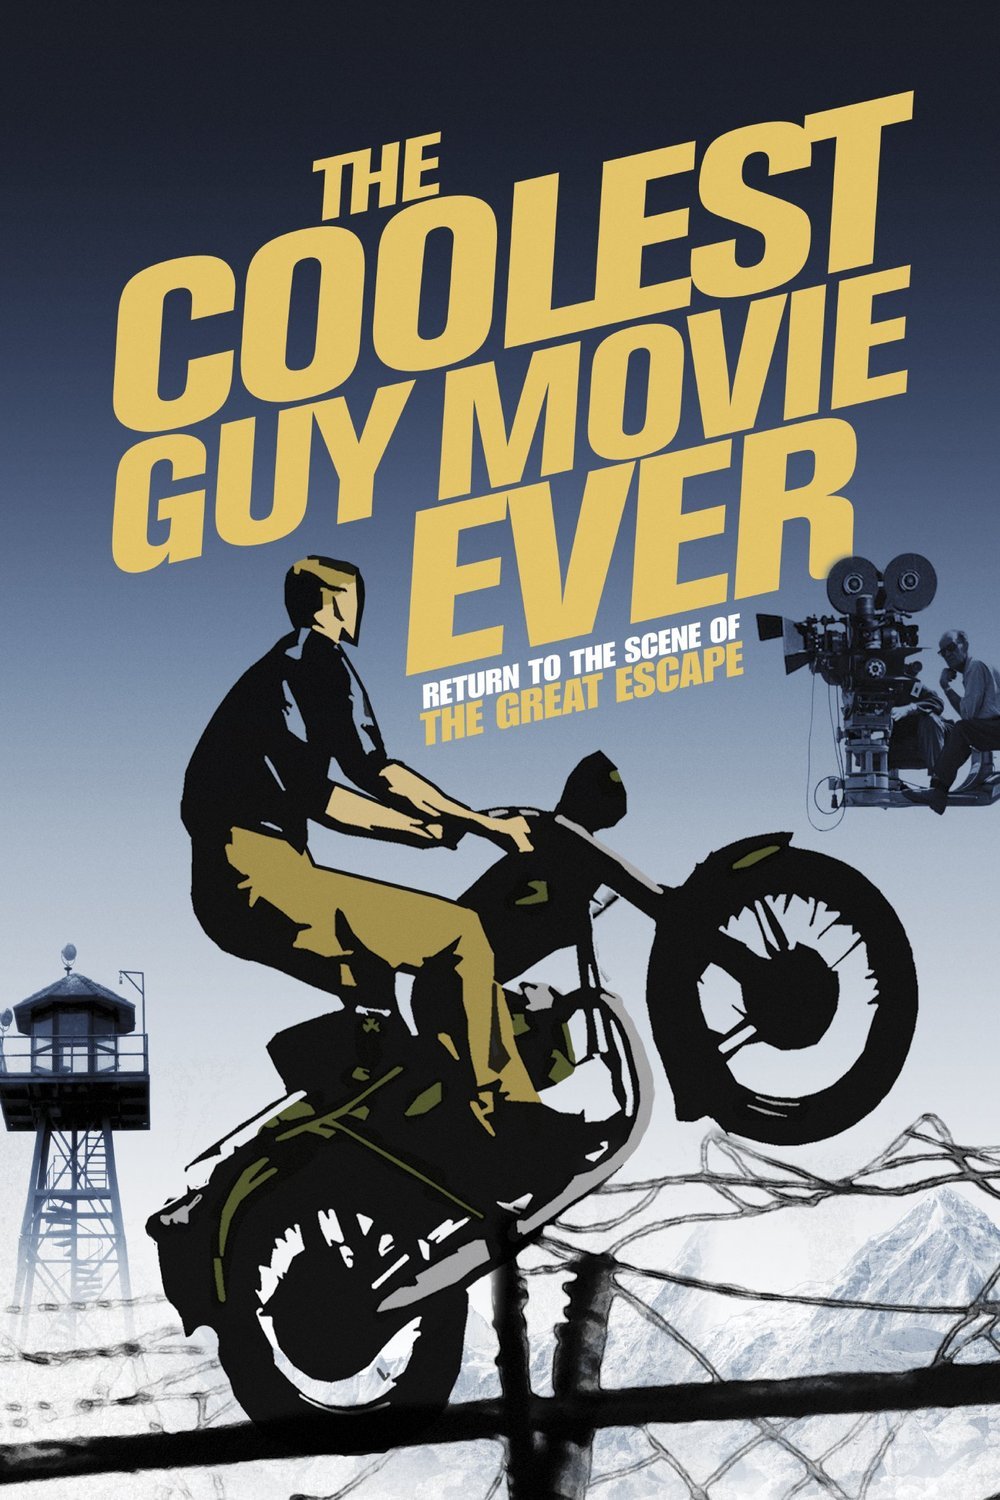 Poster of the movie The Coolest Guy Movie Ever: Return to the Scene of the Great Escape